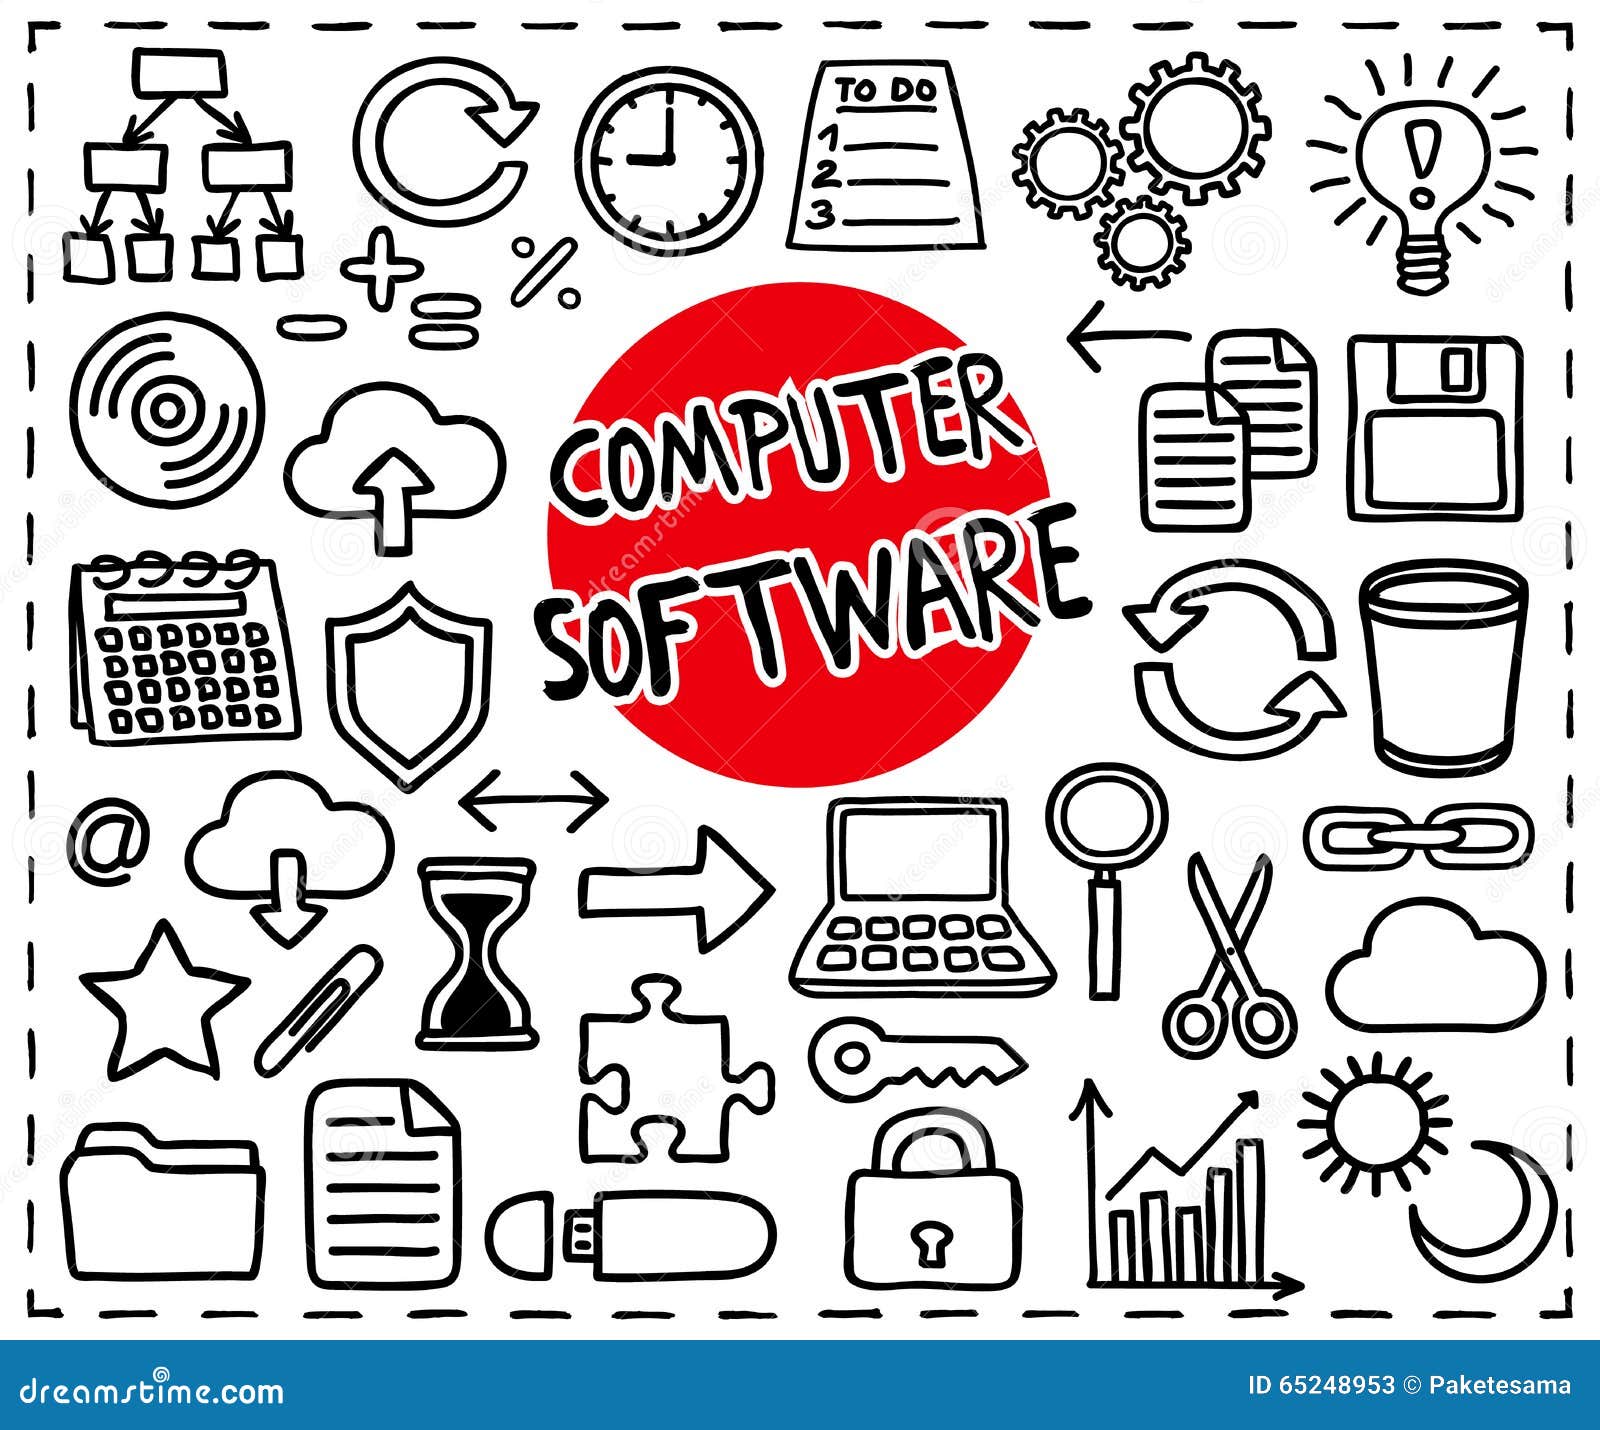 Computer Software Set Stock Vector Illustration Of Recycle 65248953